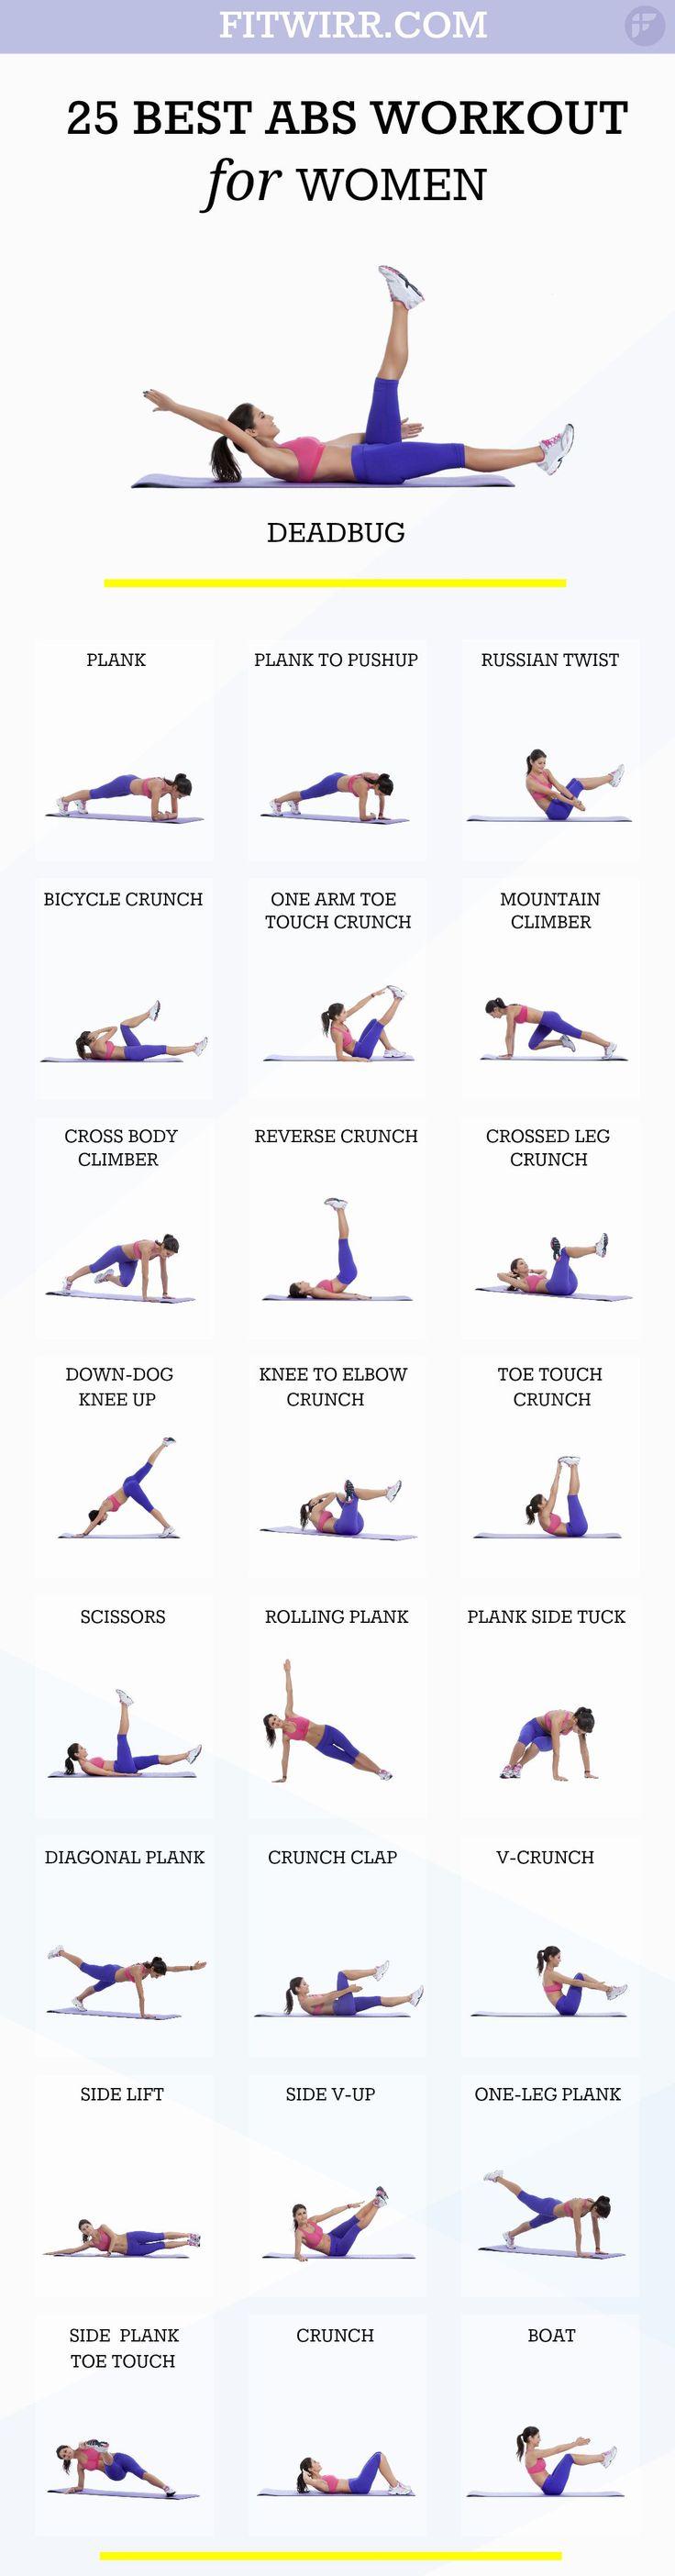 Mariage - Ab Workouts: 25 Best Ab Exercises For Women [Image List]